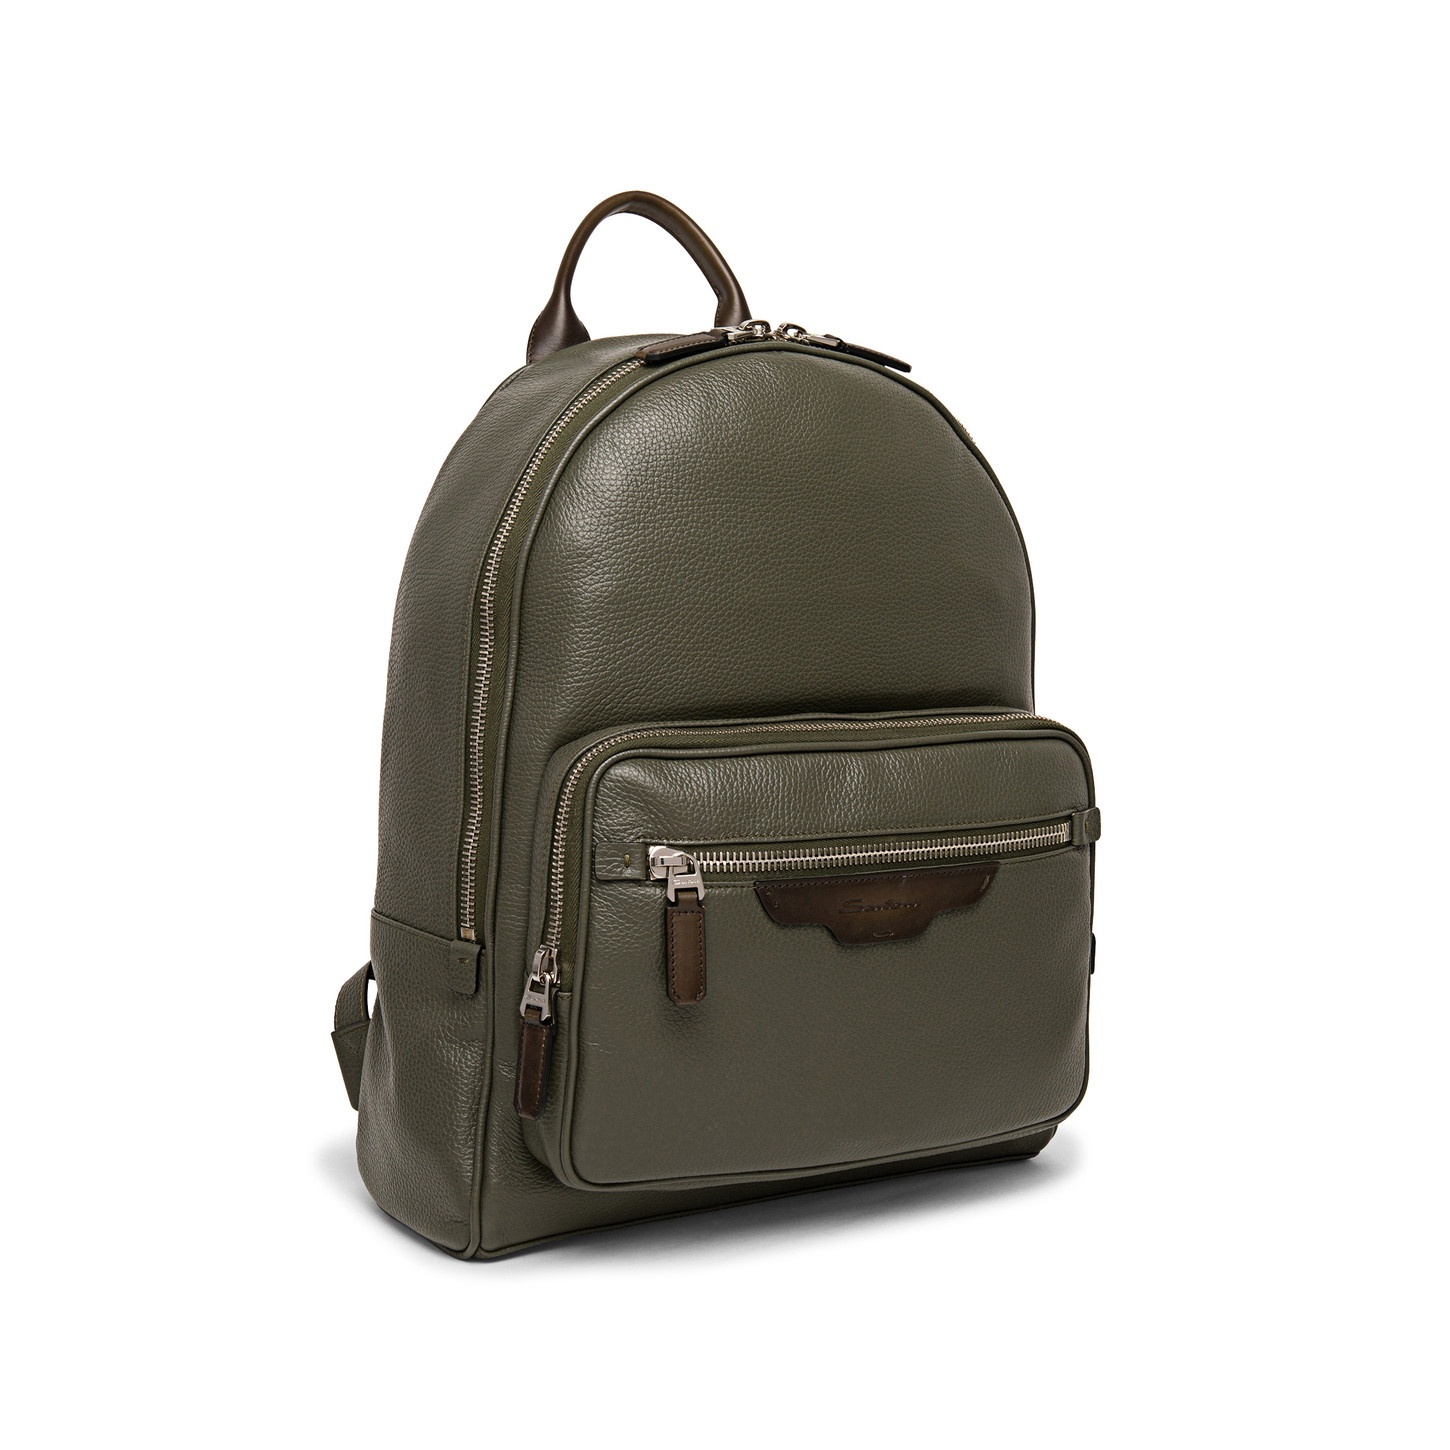 Green tumbled leather backpack - 5